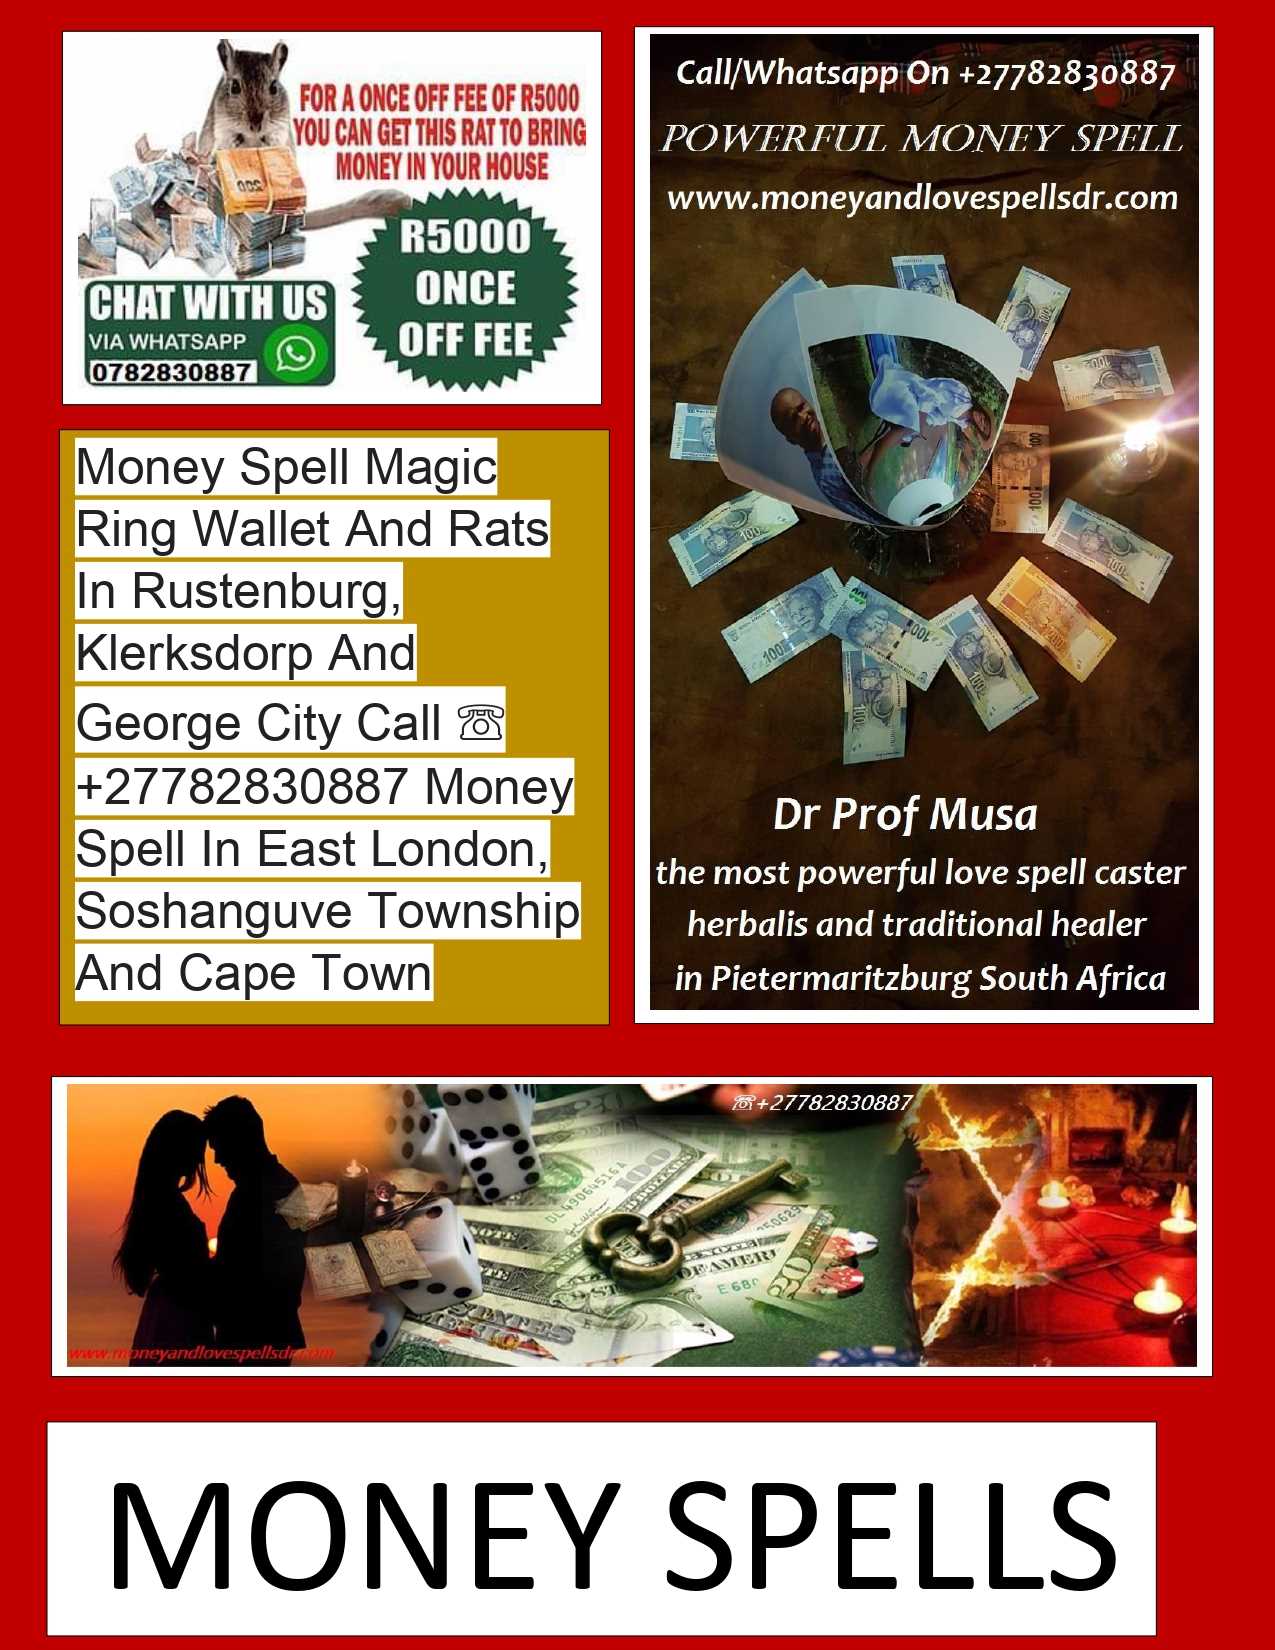 Money Specialist And Supreme Witch Doctor In Ejido Ignacio Zaragoza City in Mexico And Johannesburg Gauteng Call ☏ +27782830887 Instant Money Spell In Pietermaritzburg South Africa And Kanie Town in Japan